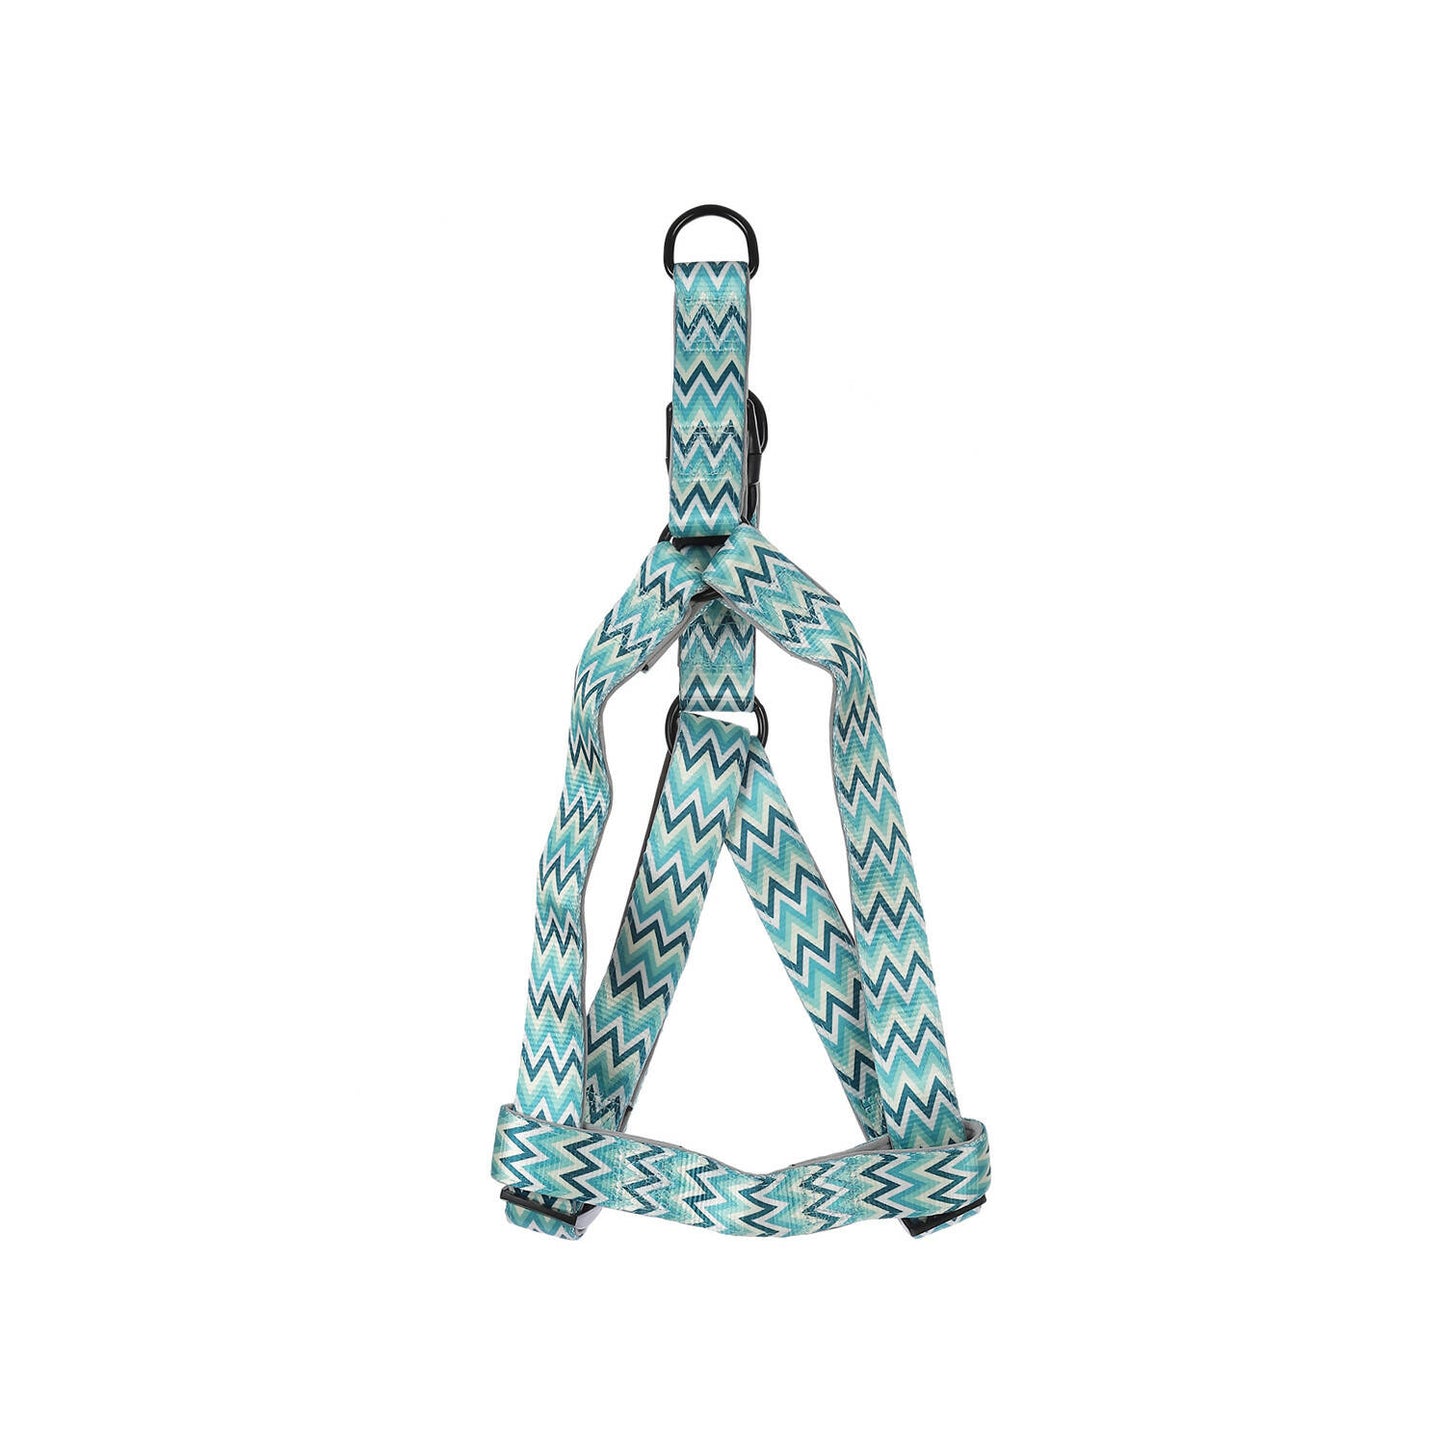 Basil - Printed Rainbow Color Padded Harness For Dogs